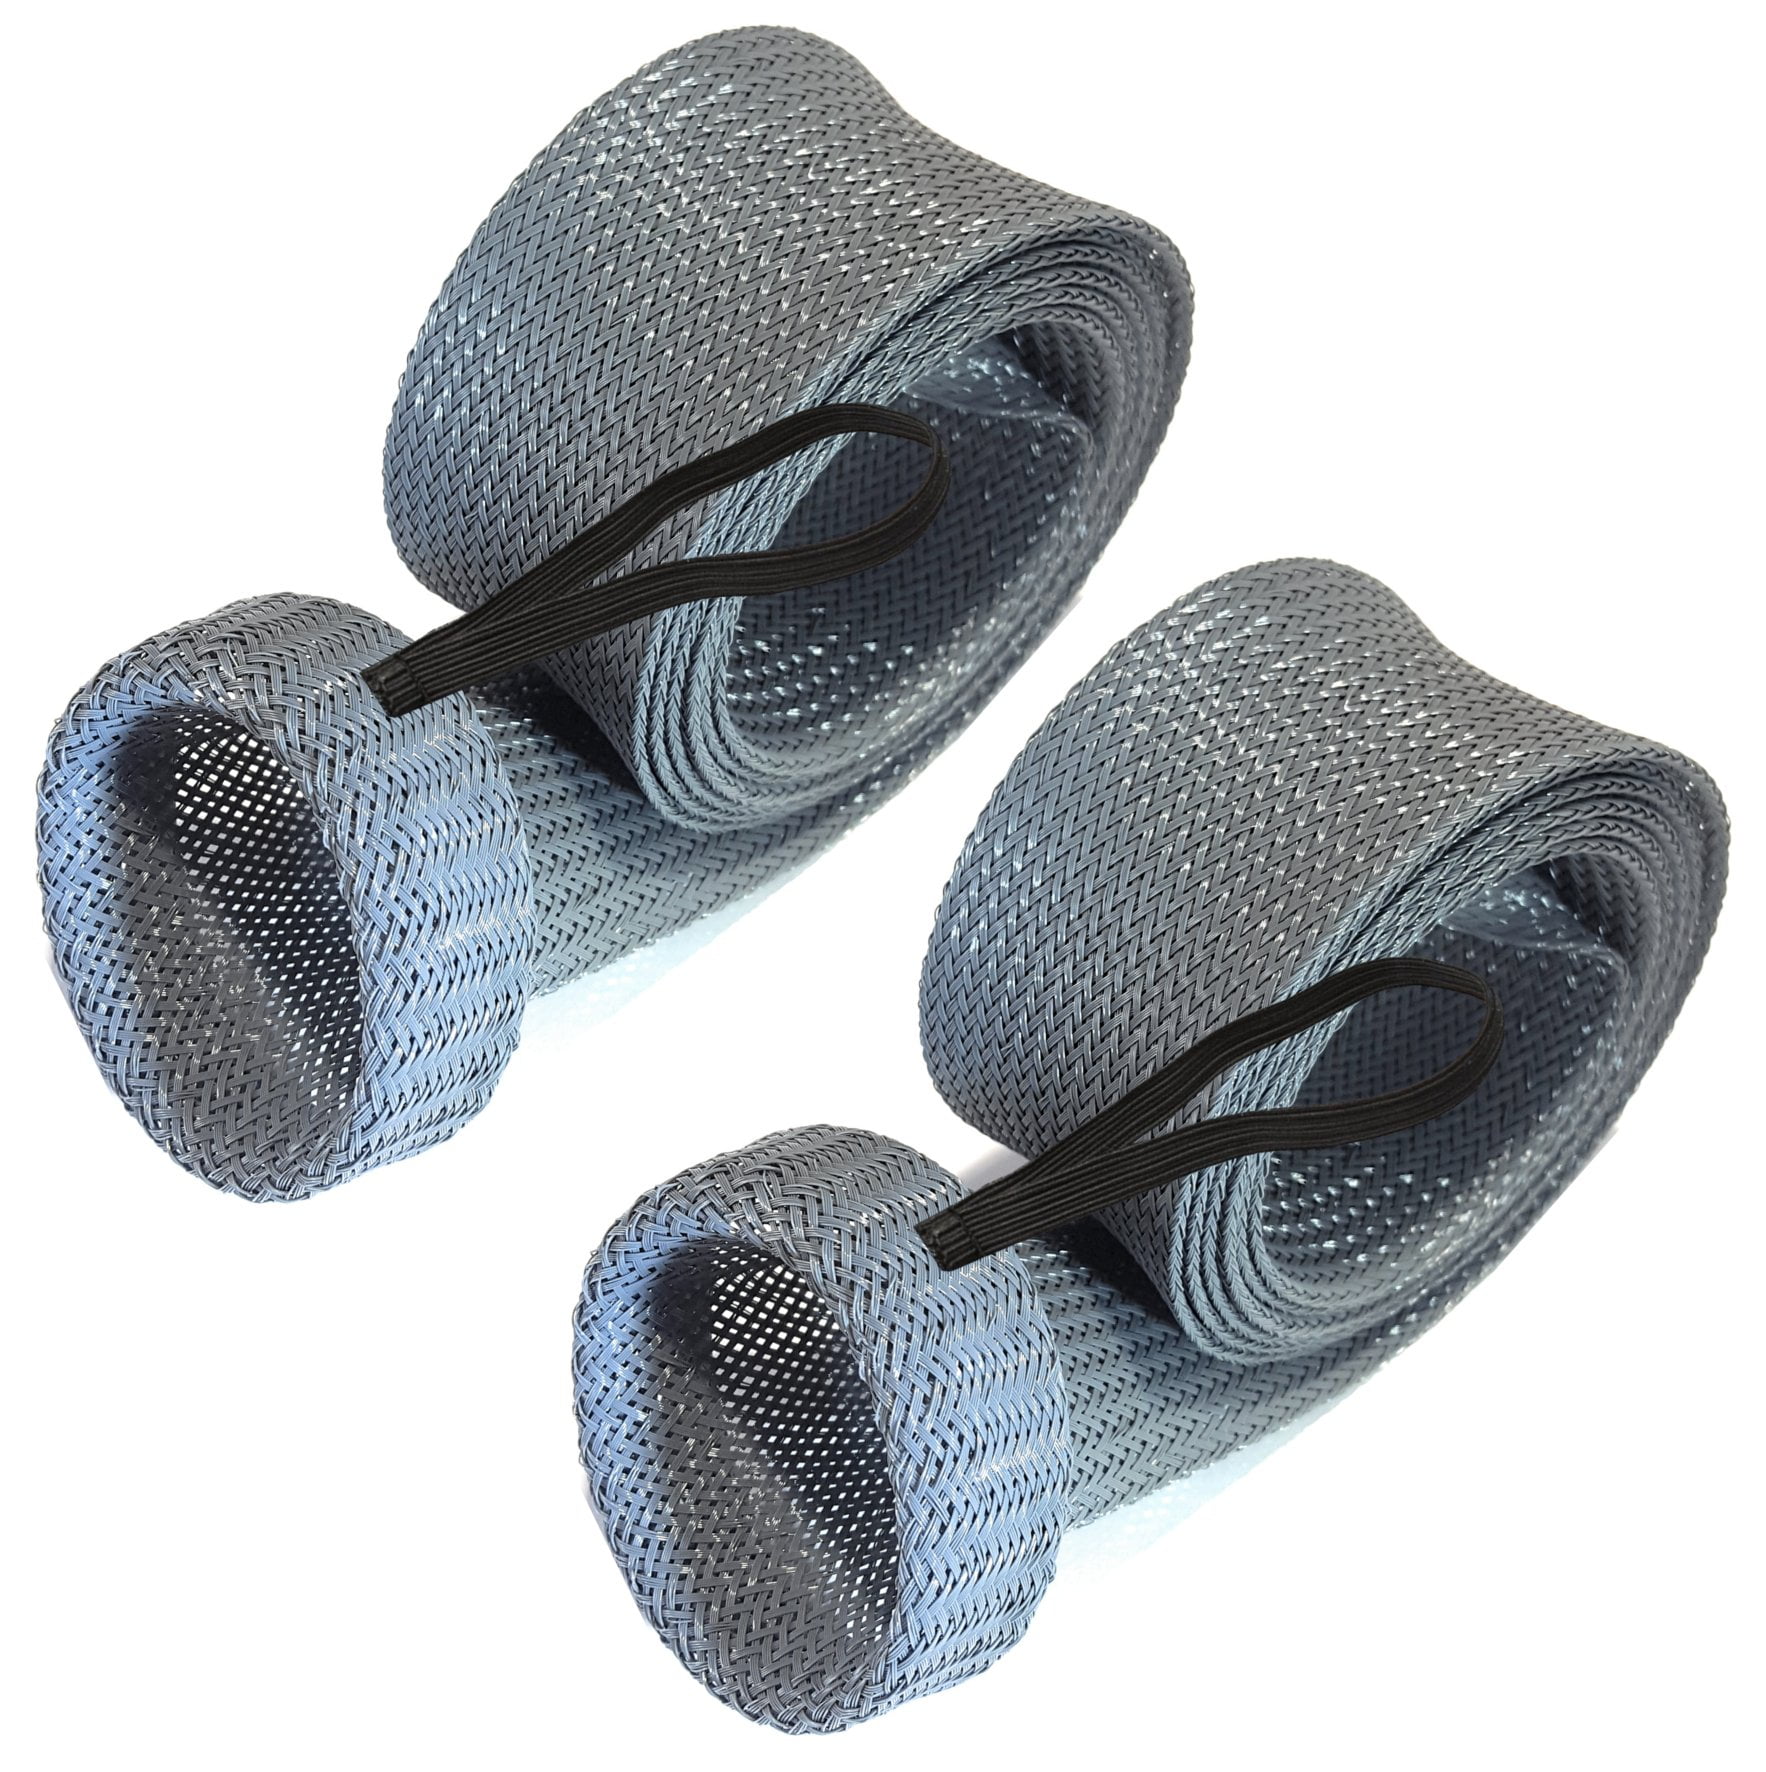 Rod Building Wrapping rod sleeves cover mesh 4 colors 3 sizes 